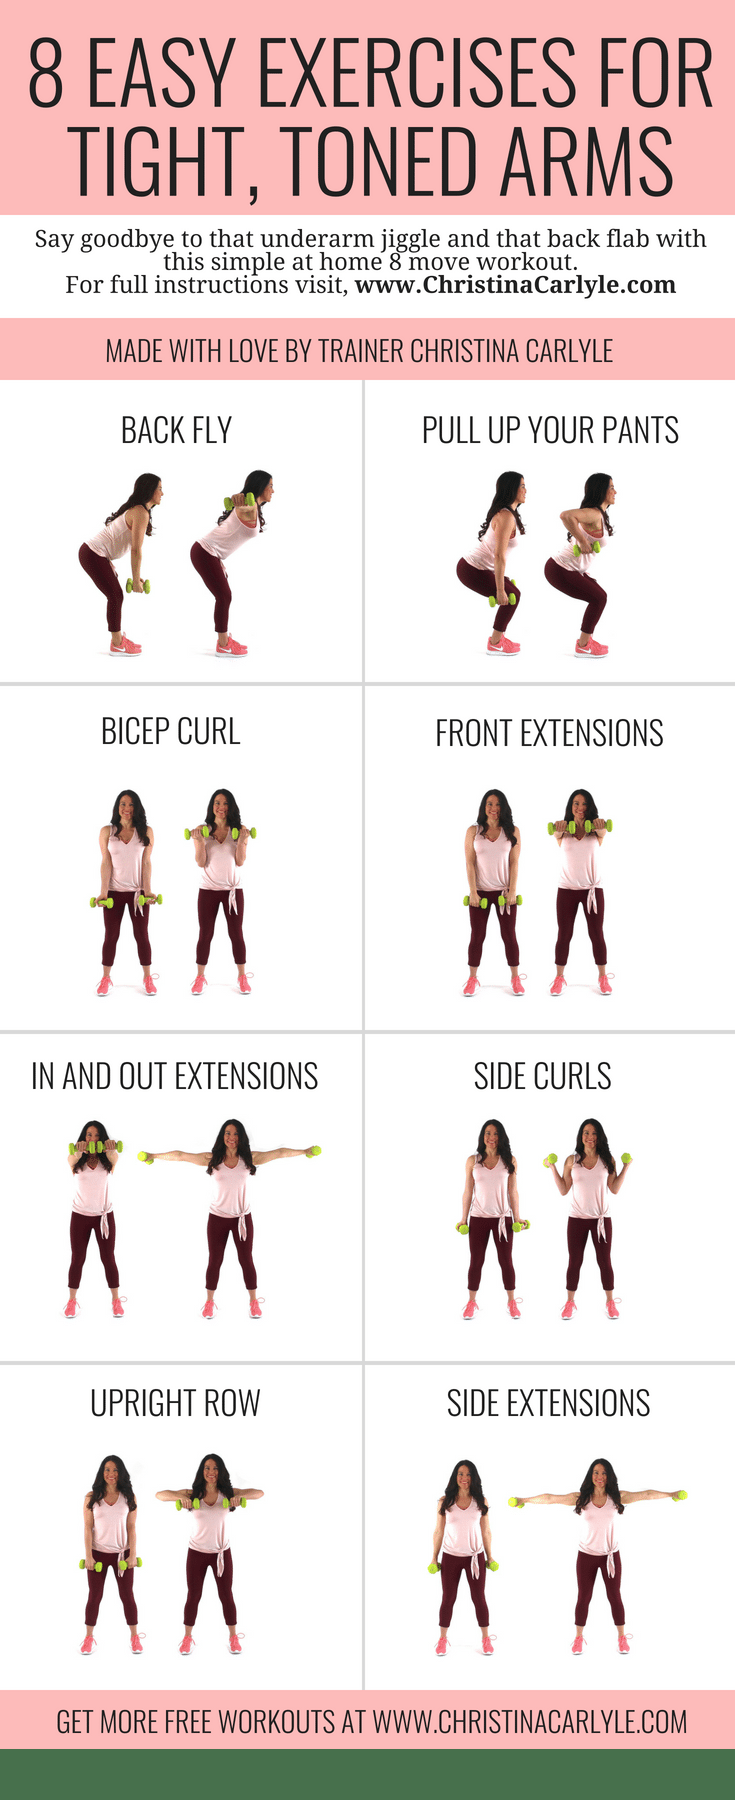 Arm Exercises with Weights for Women that want Tight, Toned Arms -   18 fitness Exercises articles ideas